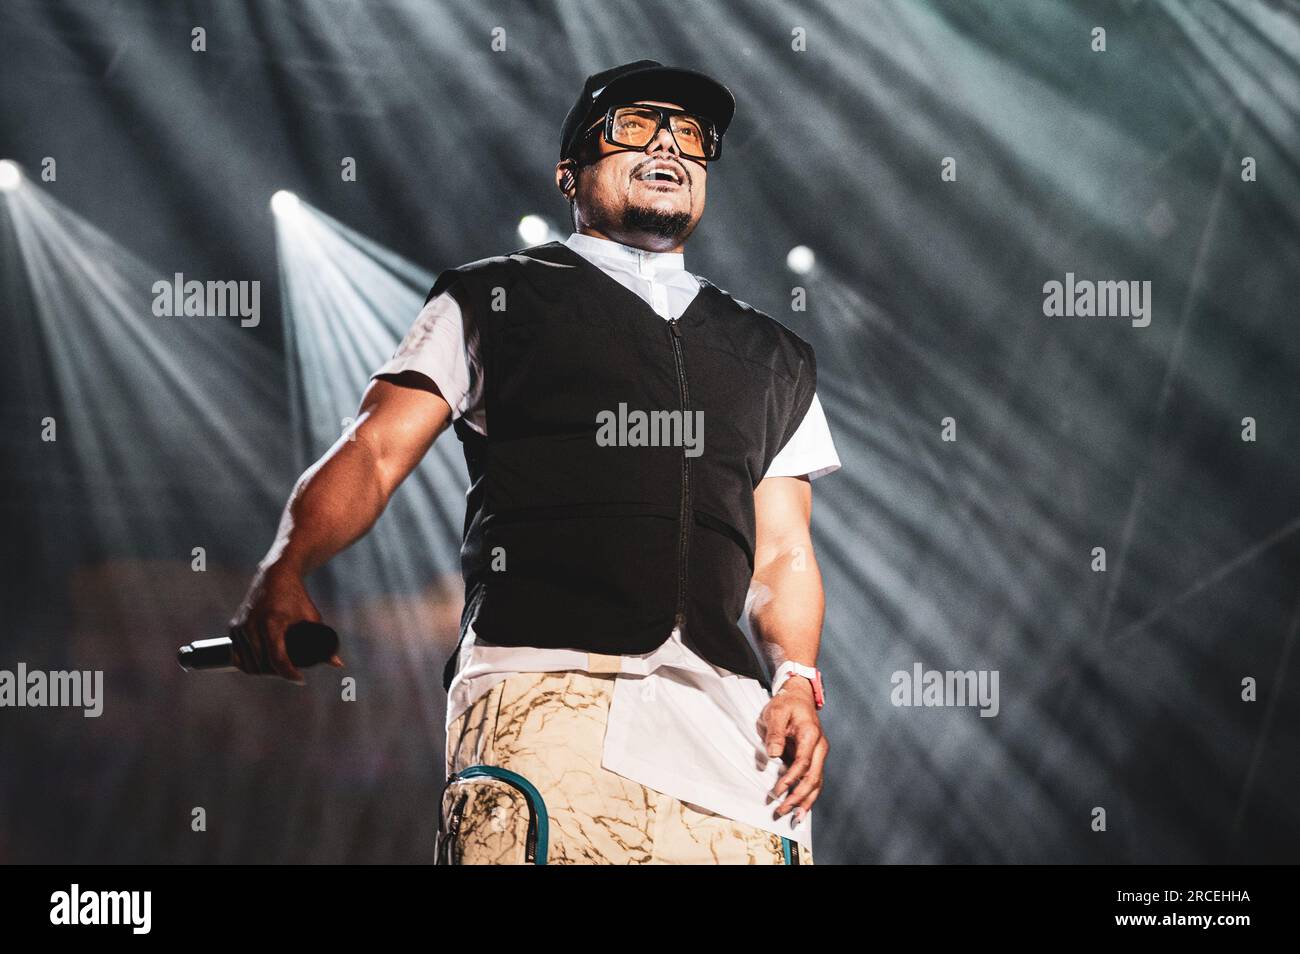 TORINO, STUPINIGI SONIC PARK FESTIVAL 2023, ITALY: Apl.de.ap (real name Allan Pineda Lindo) of the American musical group consisting of rappers called Black Eyed Peas performing live at the Stupinigi Sonic Park festival Stock Photo